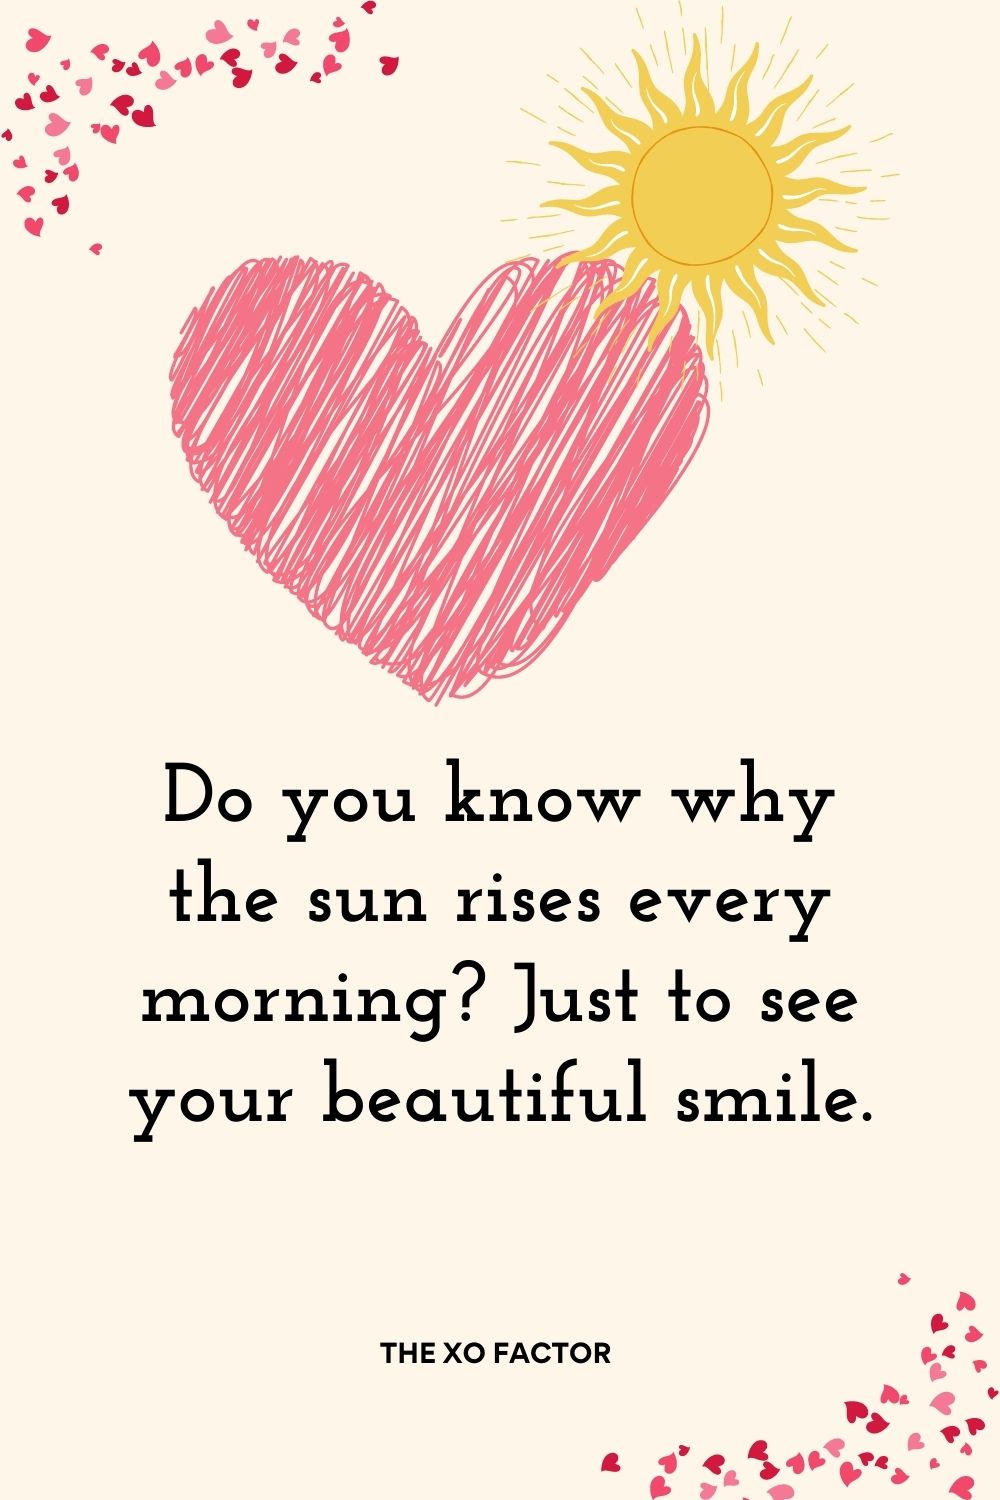 Do you know why the sun rises every morning? Just to see your beautiful smile.